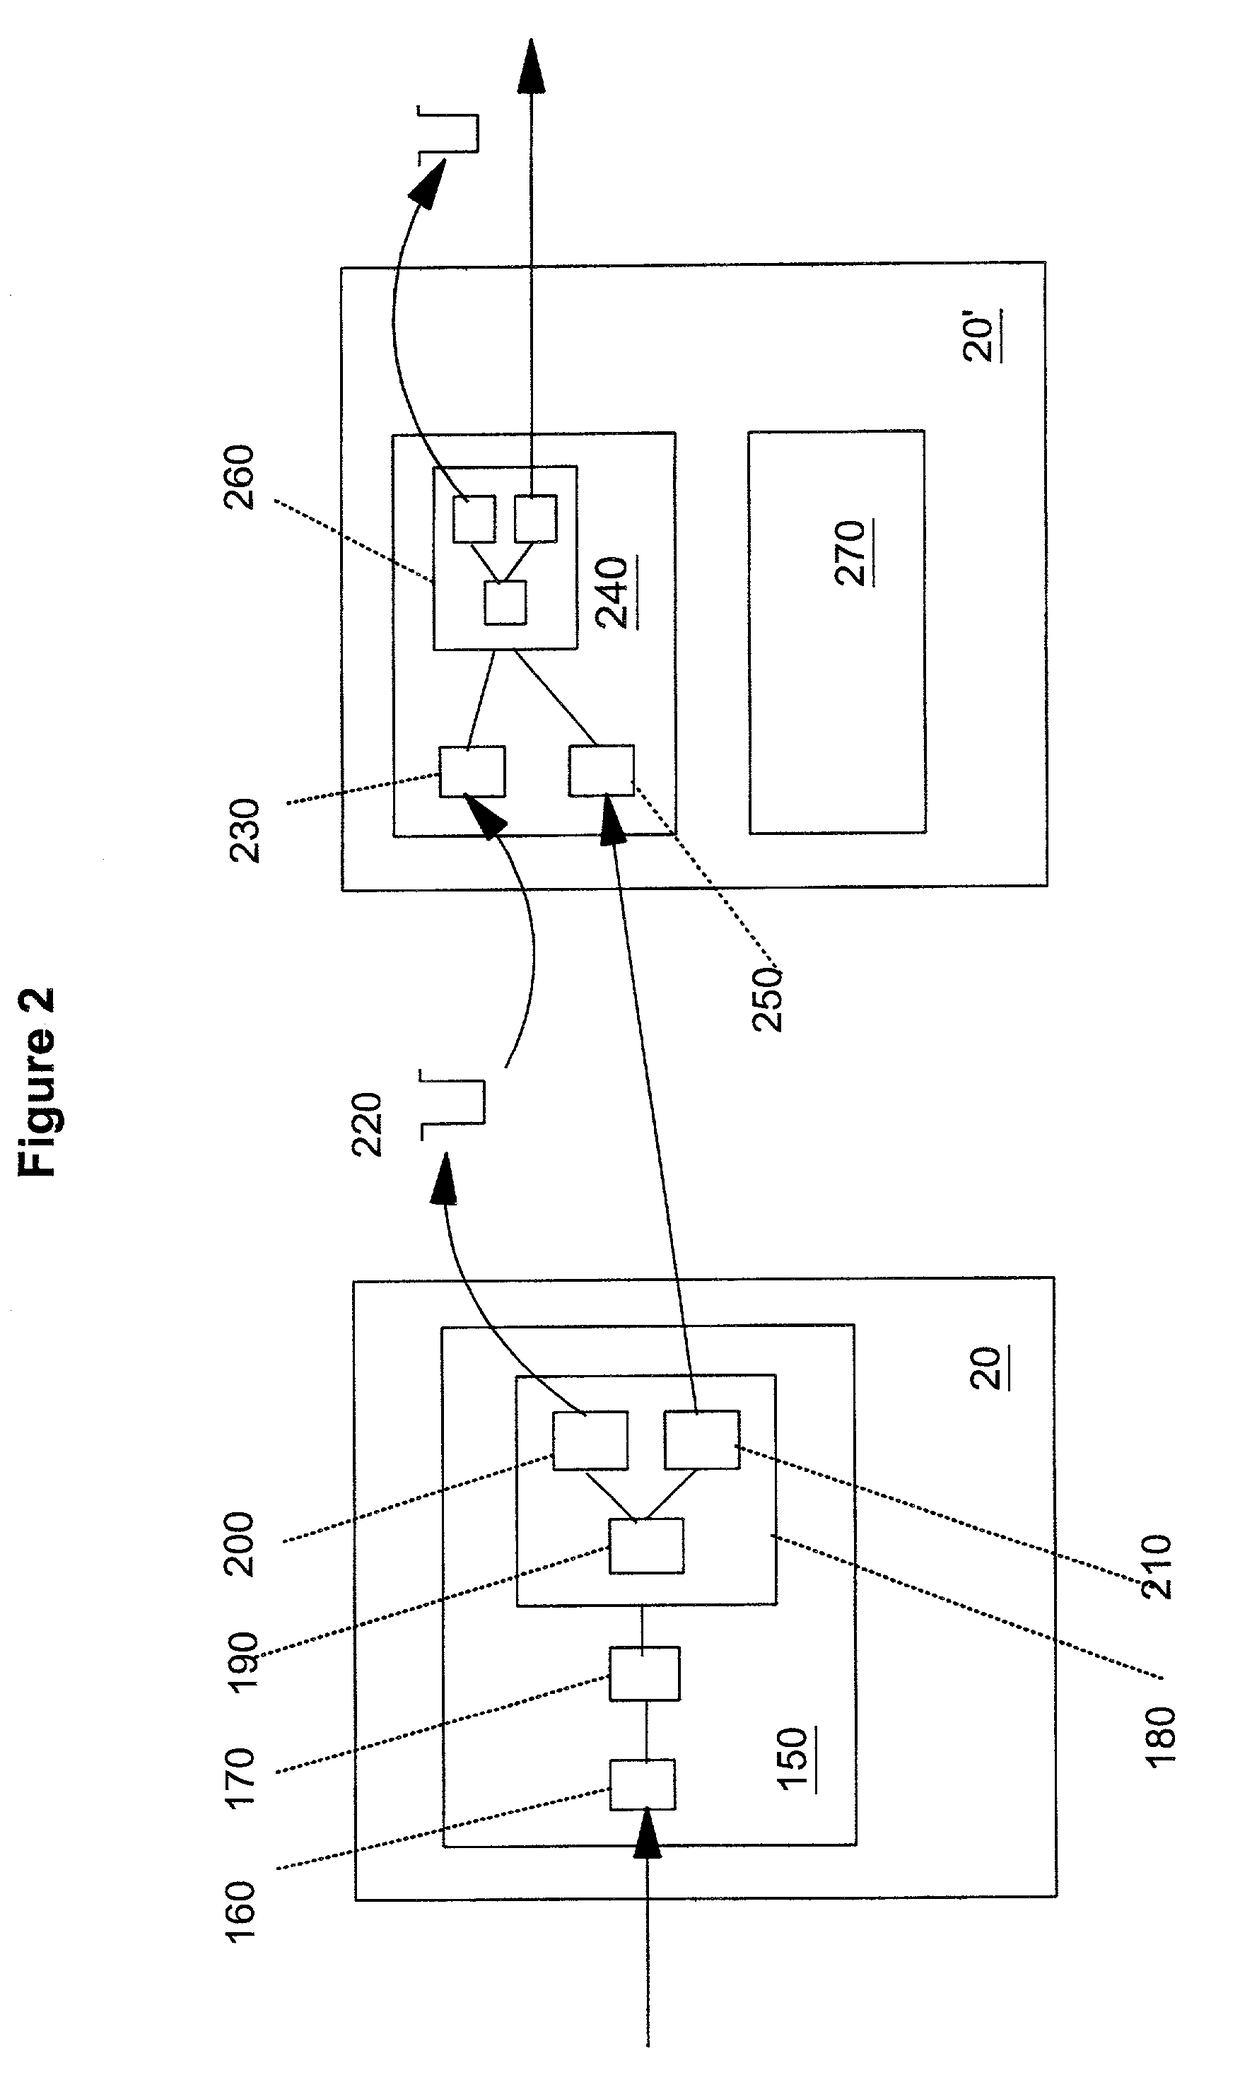 Selection of communication protocol for message transfer based on quality of service requirements